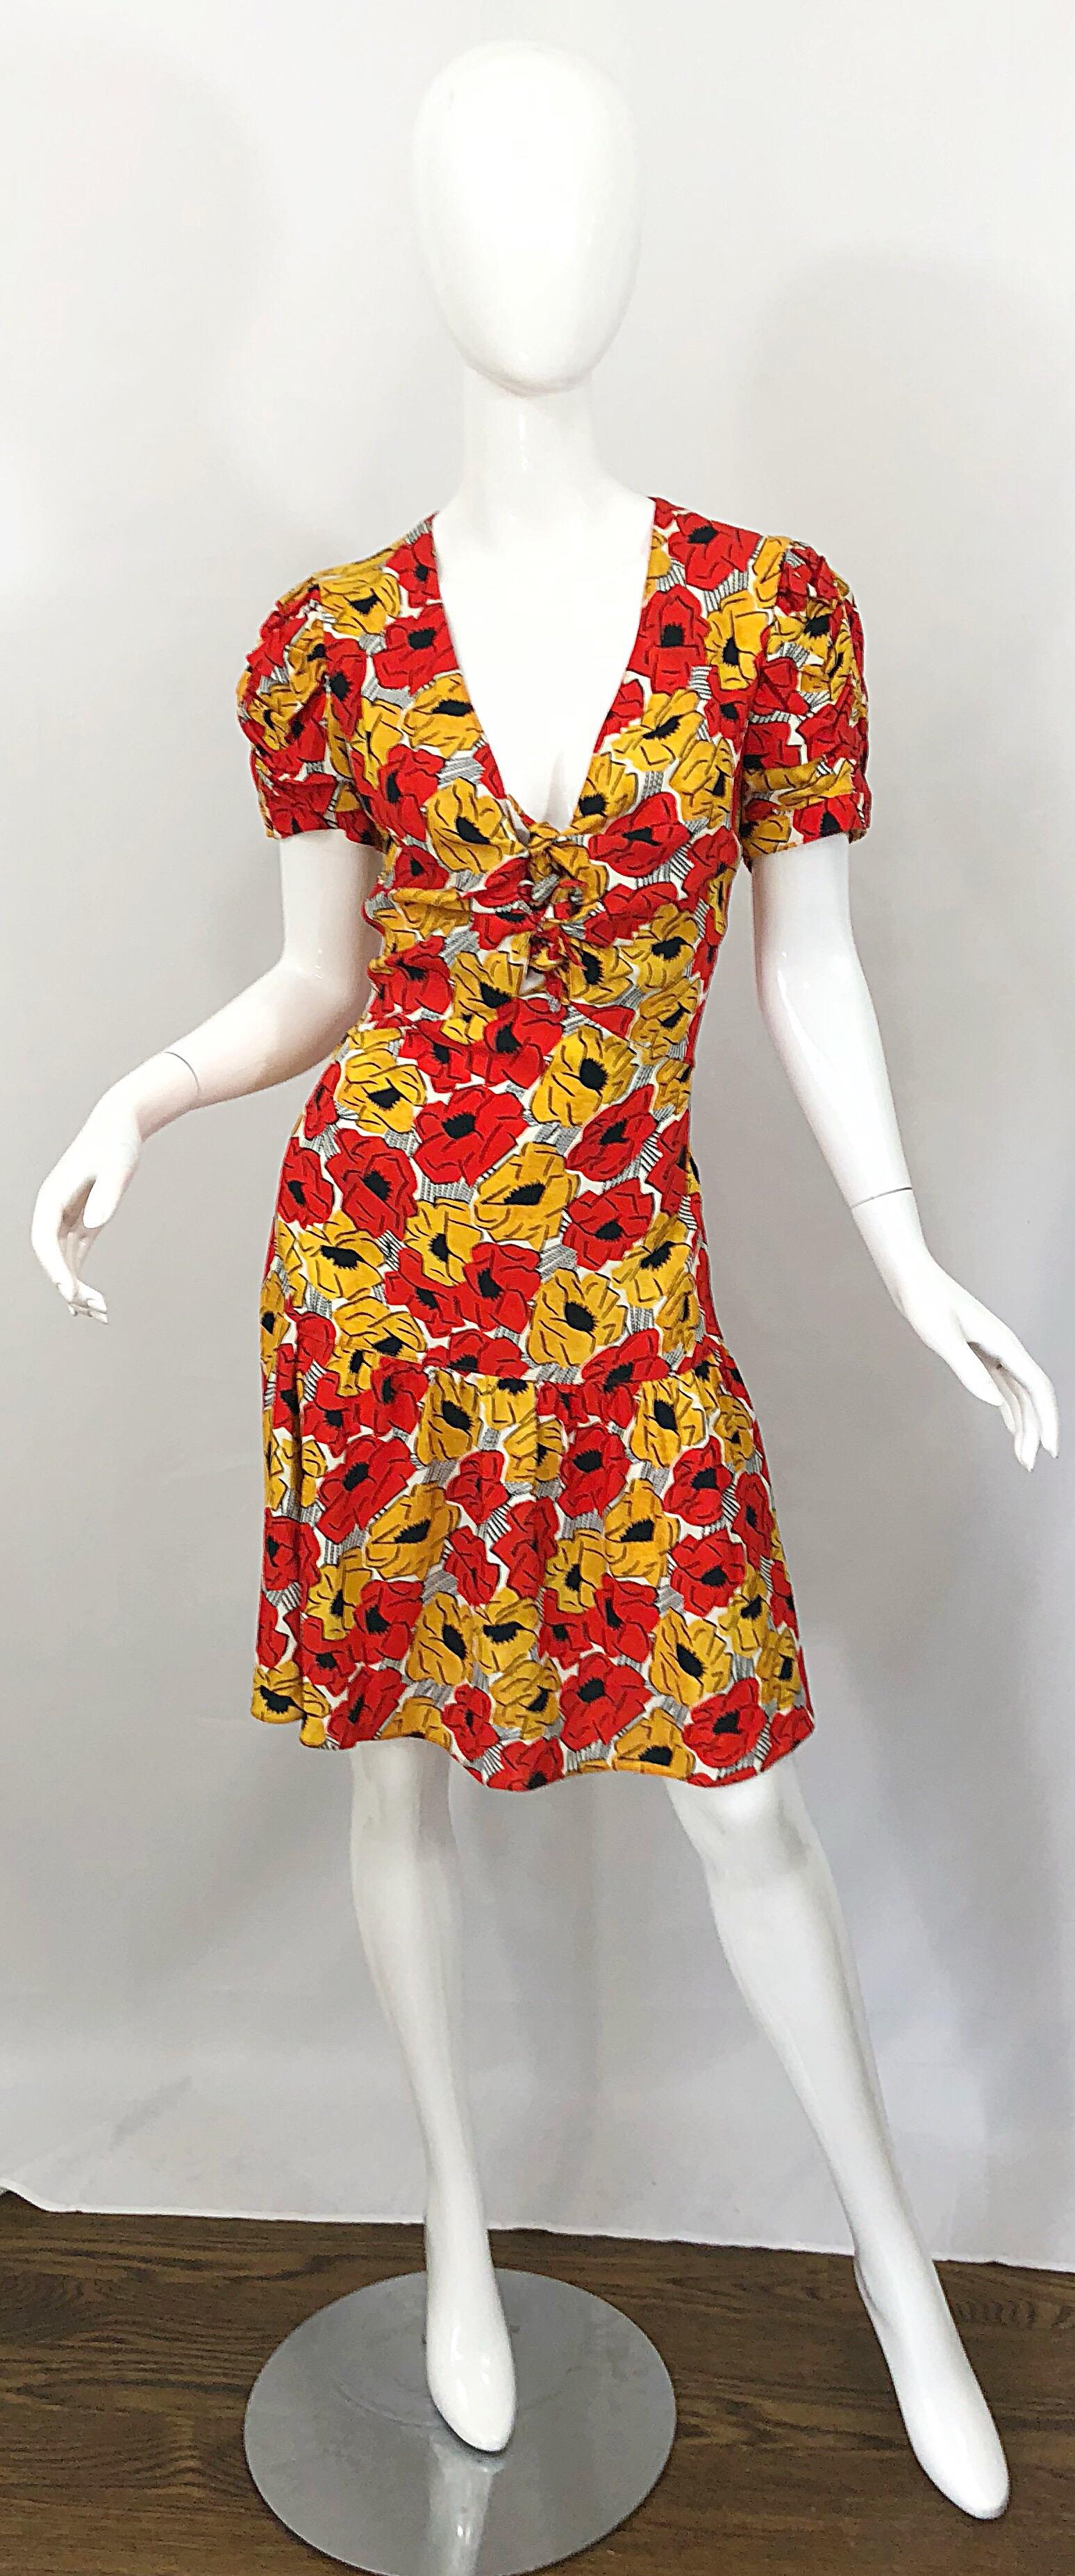 Beautiful YVES SAINT LAURENT red, yellow, black and white poppy print drop waist cut-out dress! Features vibrant colors of red and yellow with black and white throughout. Subtle cut-out details at center bust with ties. Hidden zipper up the side.